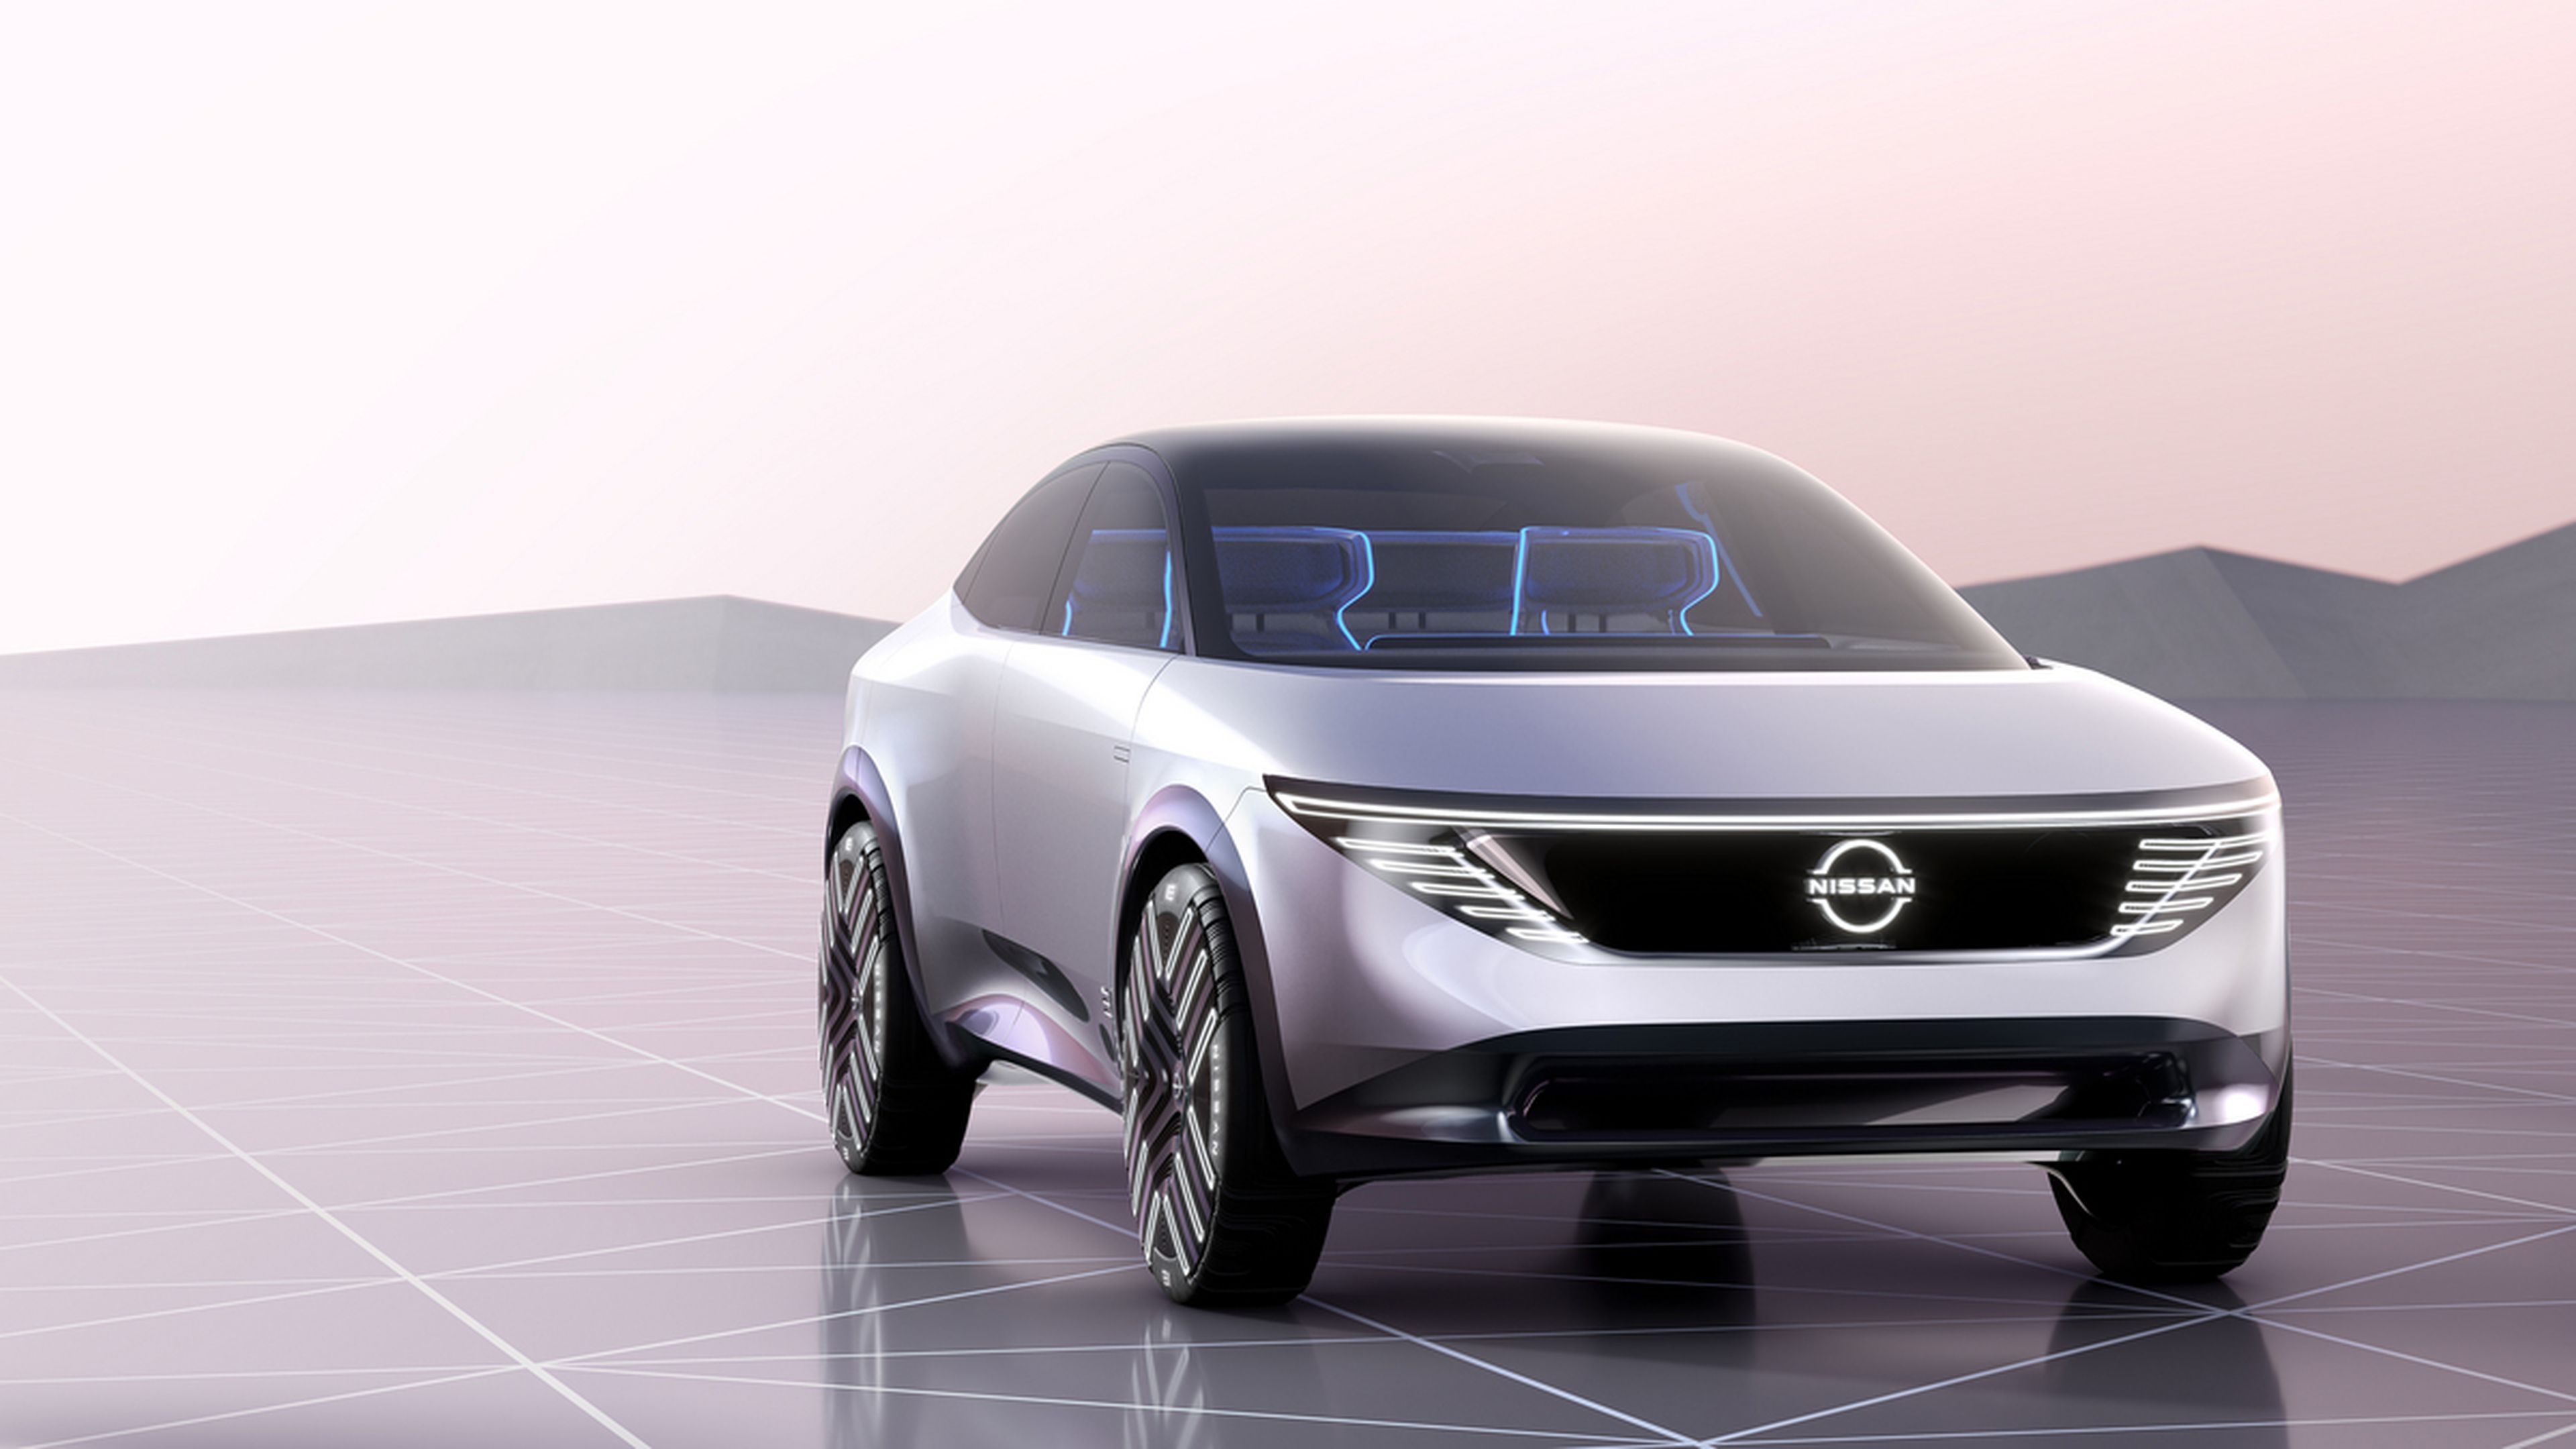 Concept Nissan Chill-Out